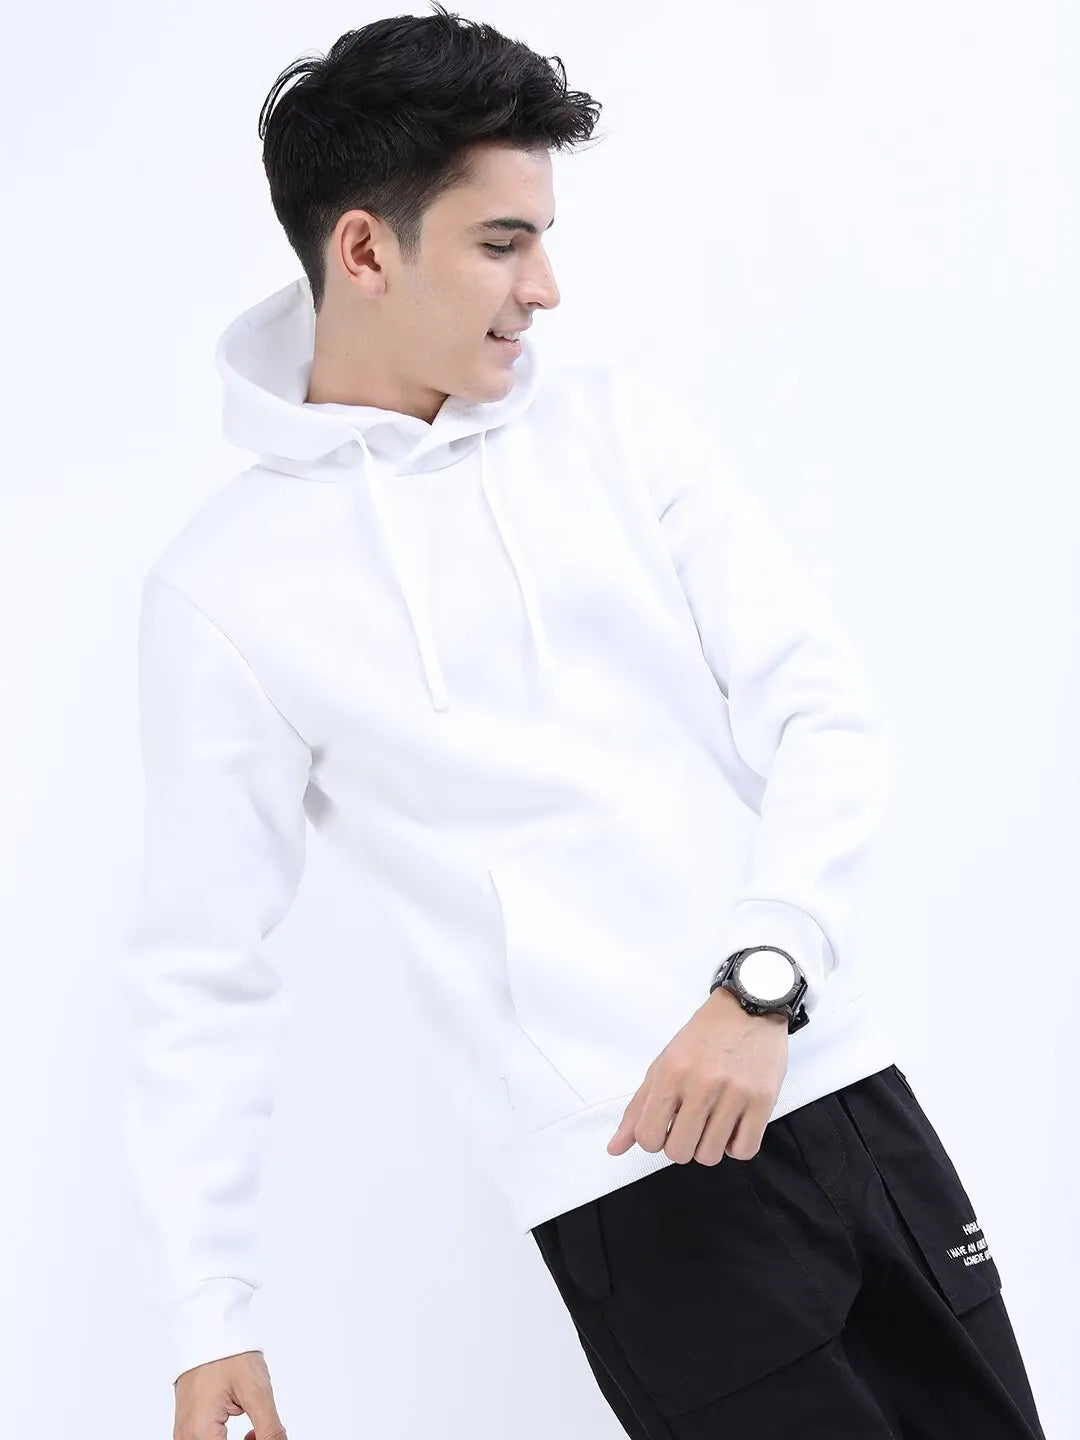 Unisex For Men and Women Hoodie White Color Full Sleeves